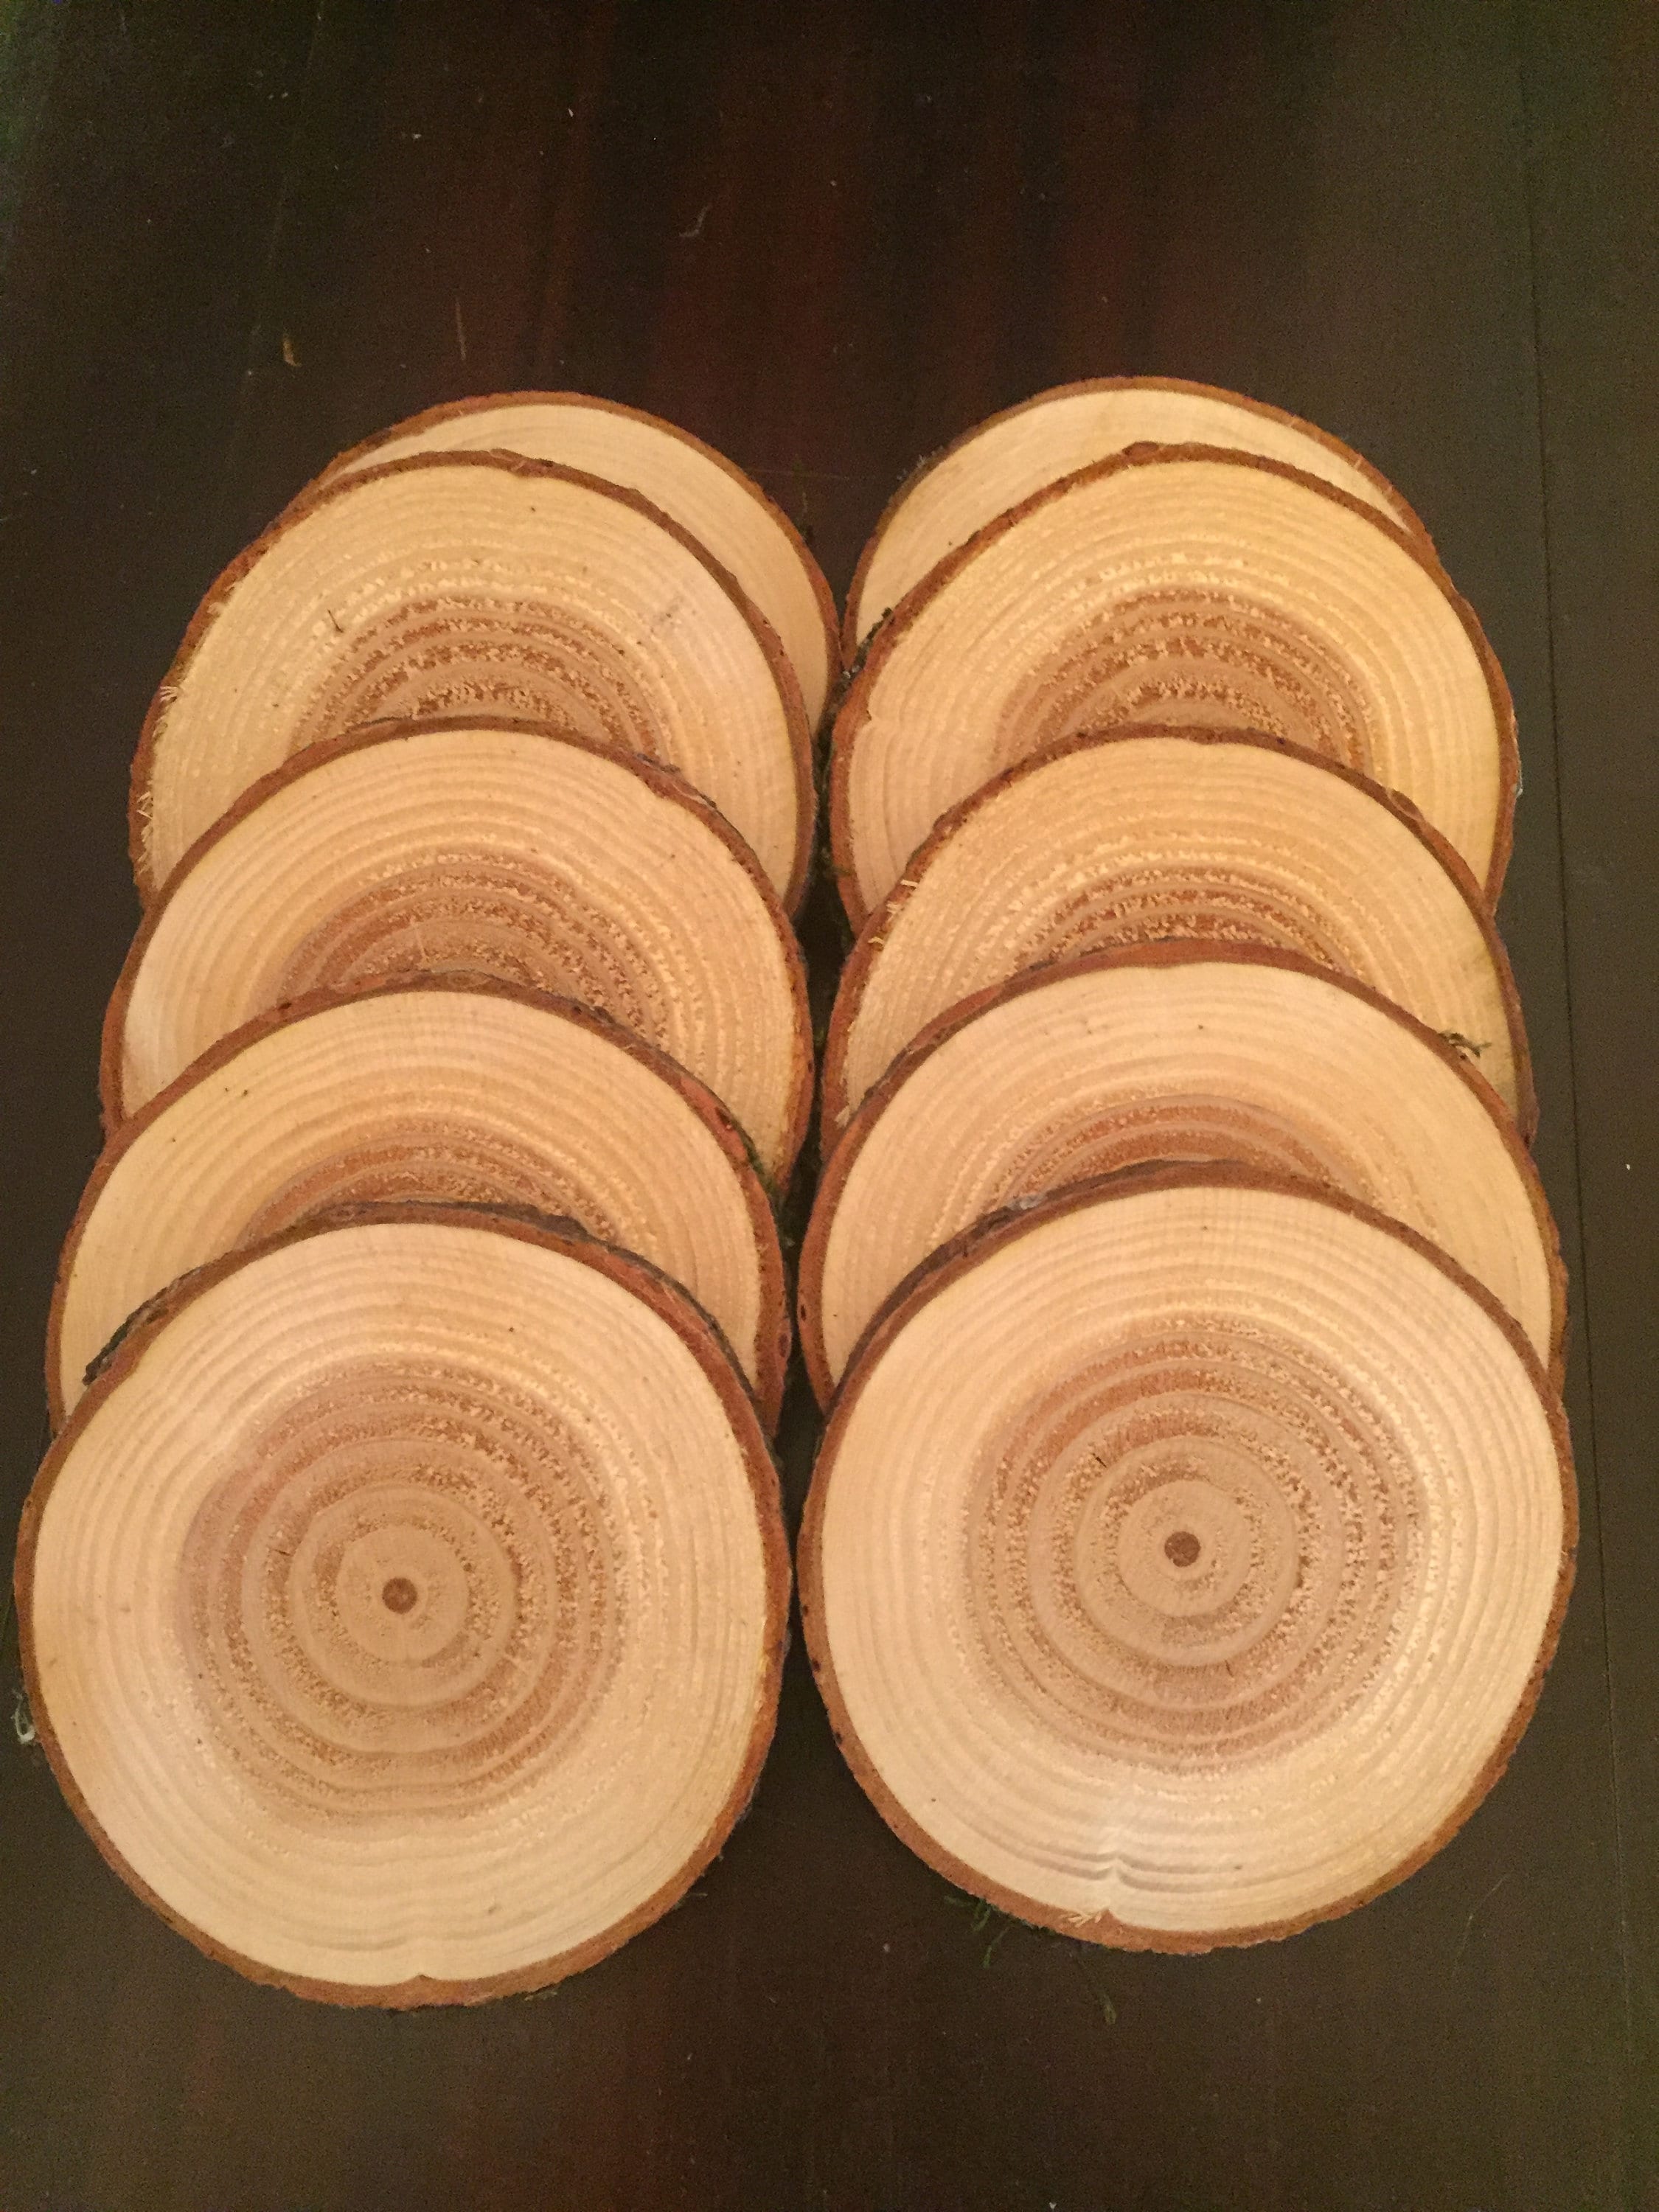 Fuyit Wood Slices 15 Pcs 4-4.3 Inches Craft Wood kit Unfinished Predrilled Tree Slices with Hole Wooden Circles Great for Arts and Crafts Christmas Ornaments DIY Crafts 